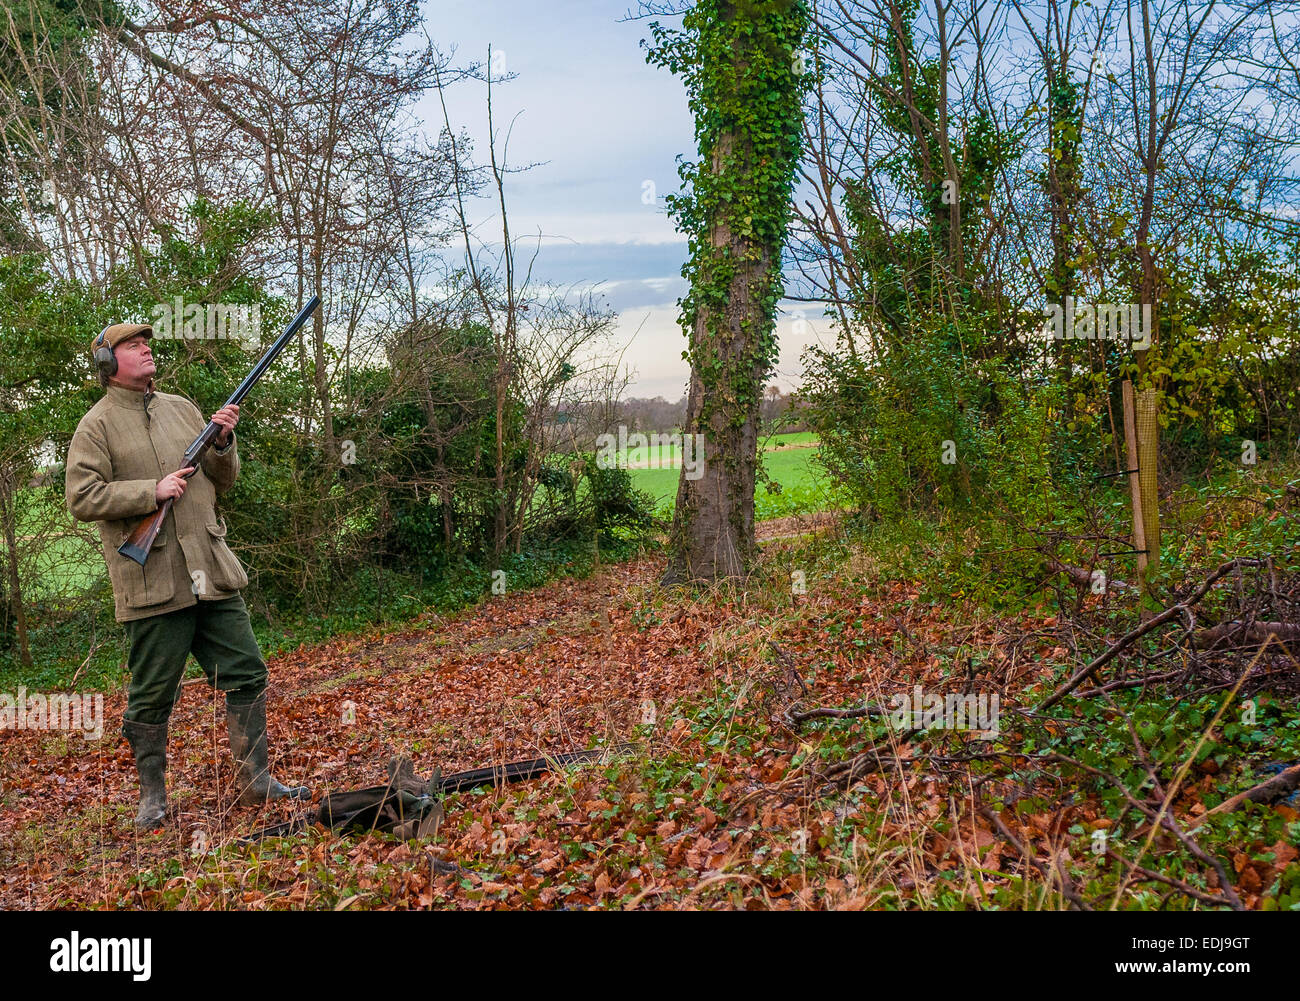 A man with a shot gun, or shotgun, on a pheasant shoot in England stood in a wood waiting to take a shot Stock Photo